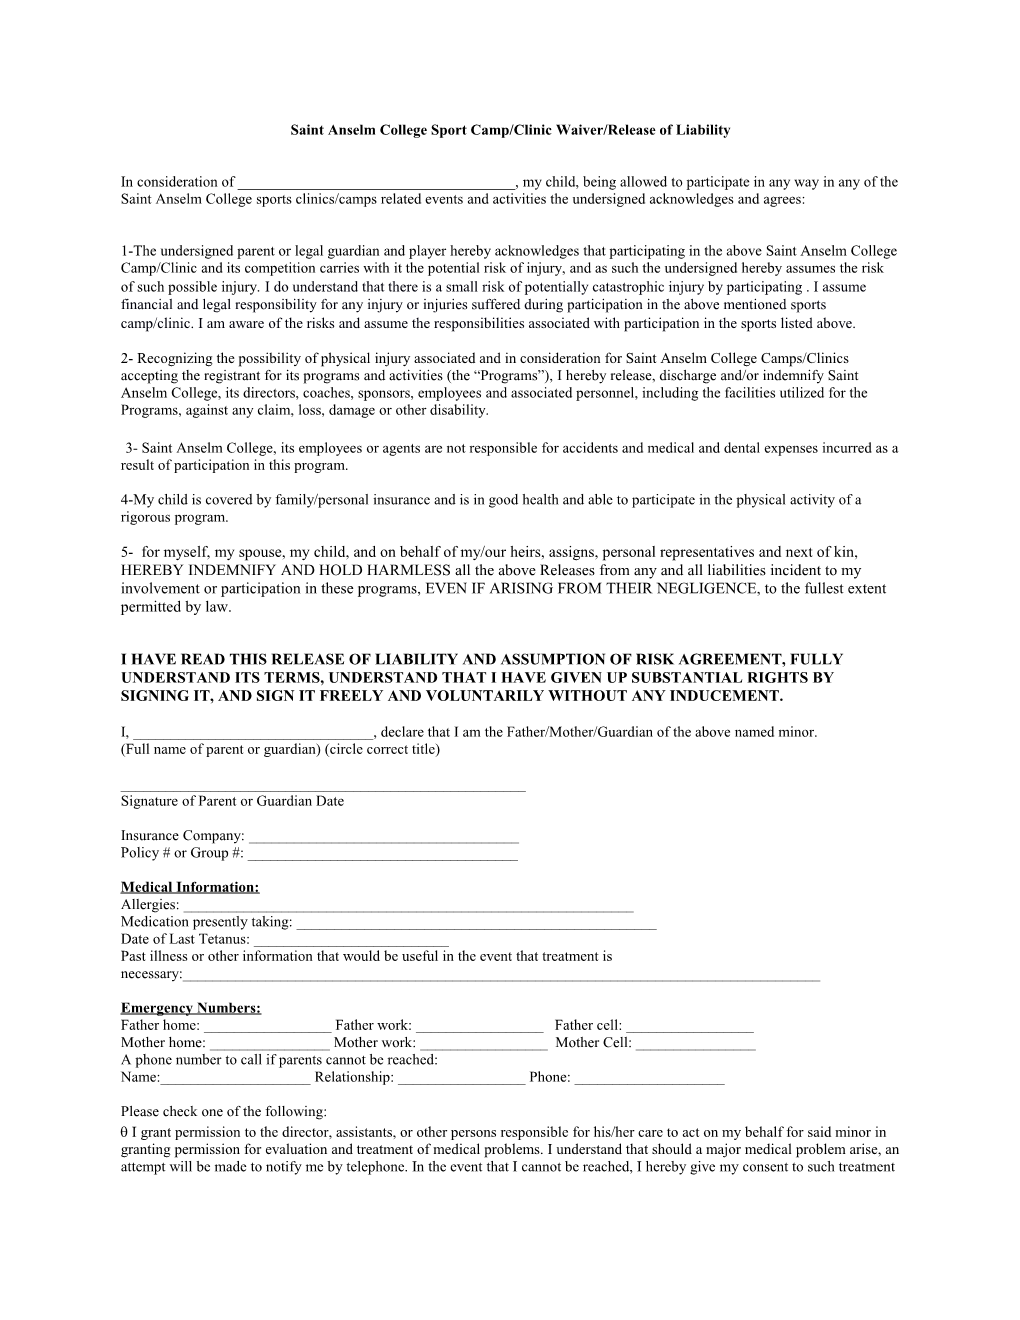 Saint Anselm College Sport Camp/Clinic Waiver/Release of Liability